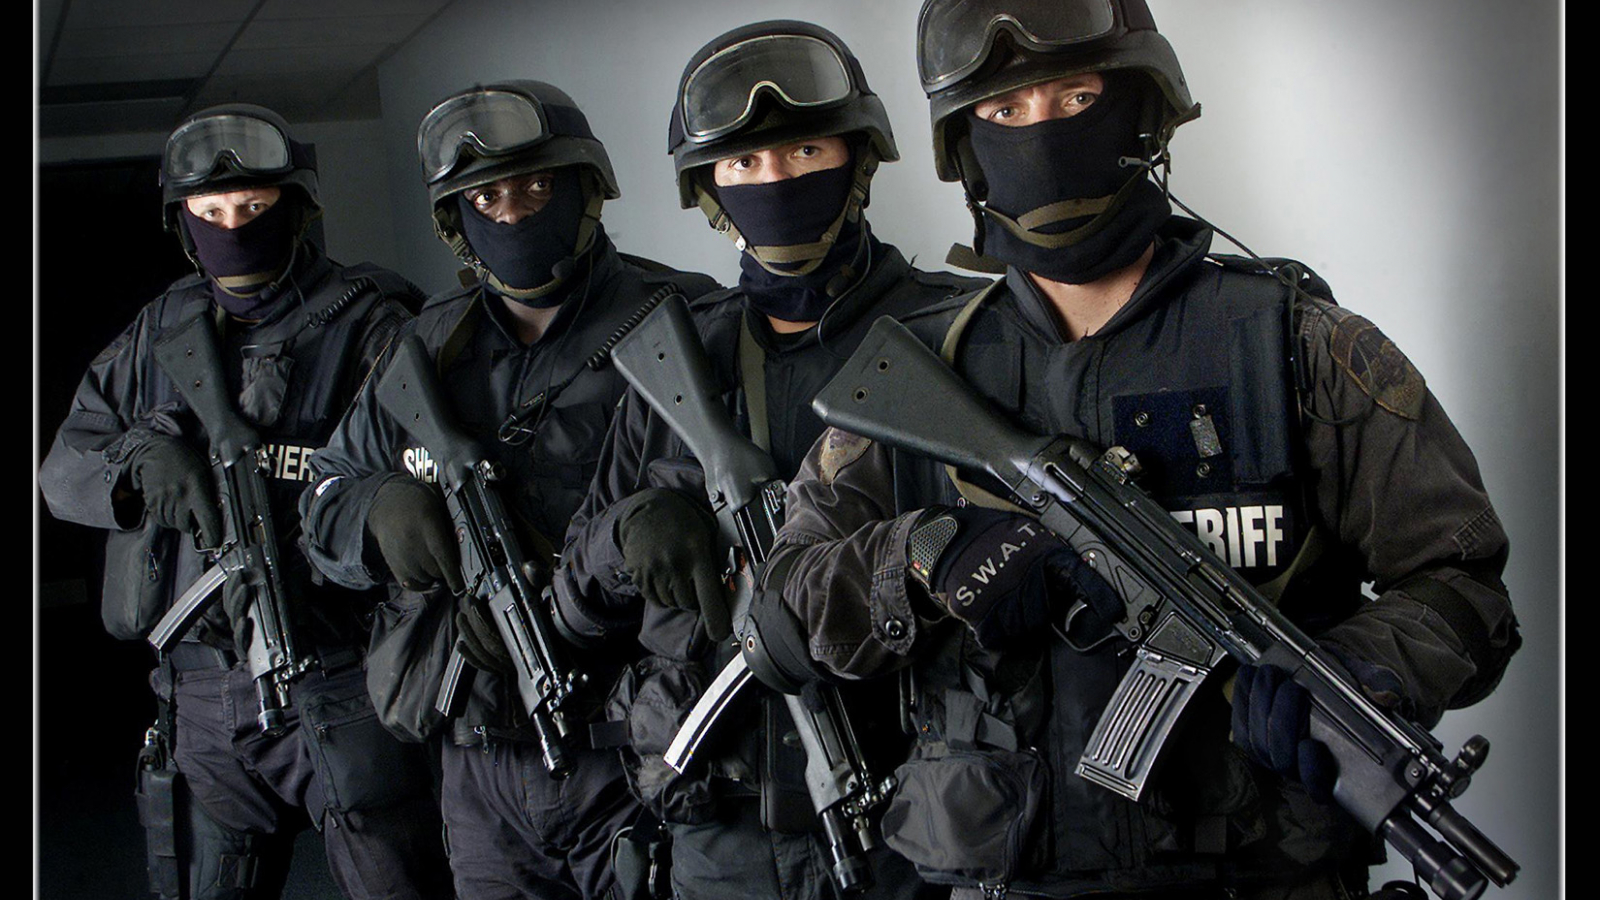 Free download Sheriffs SWAT team members right to left foreground to background [1650x1296] for your Desktop, Mobile & Tablet. Explore Police SWAT Team Wallpaper. Swat Team Wallpaper, Cool SWAT